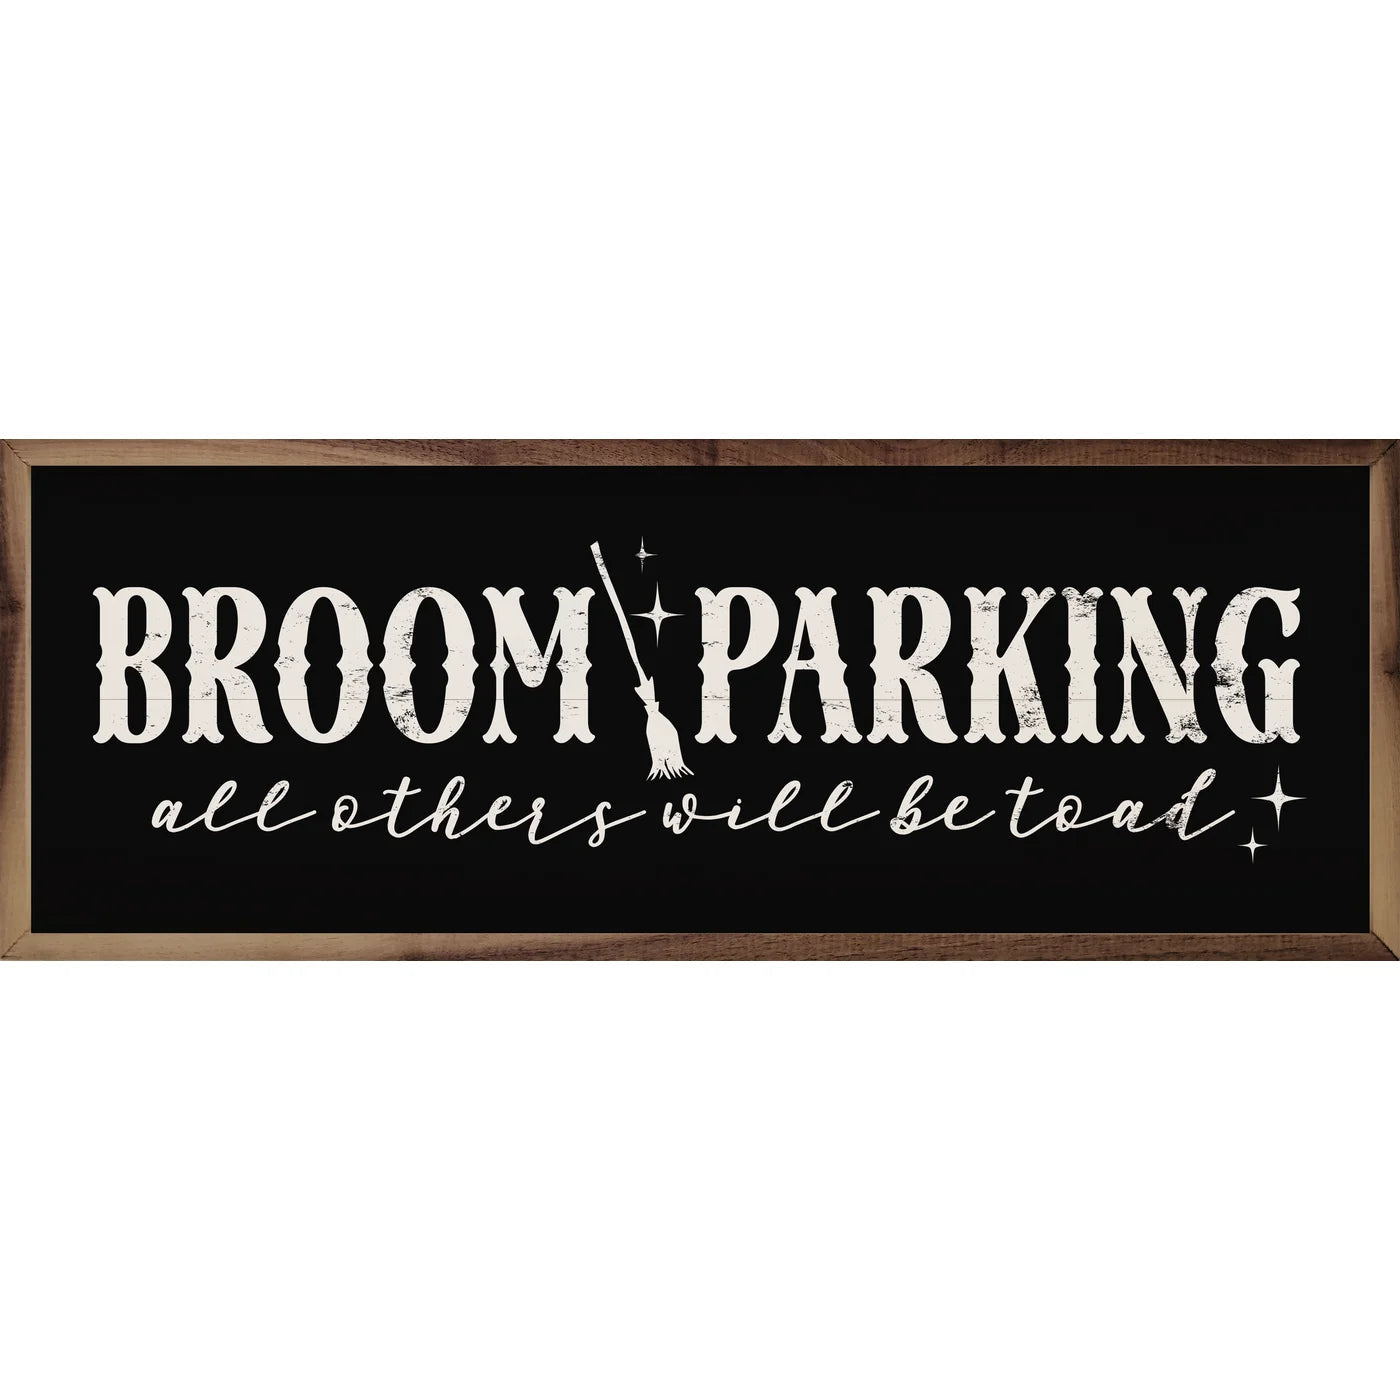 Broom Parking All Others Will Be Toad Wood Framed Print